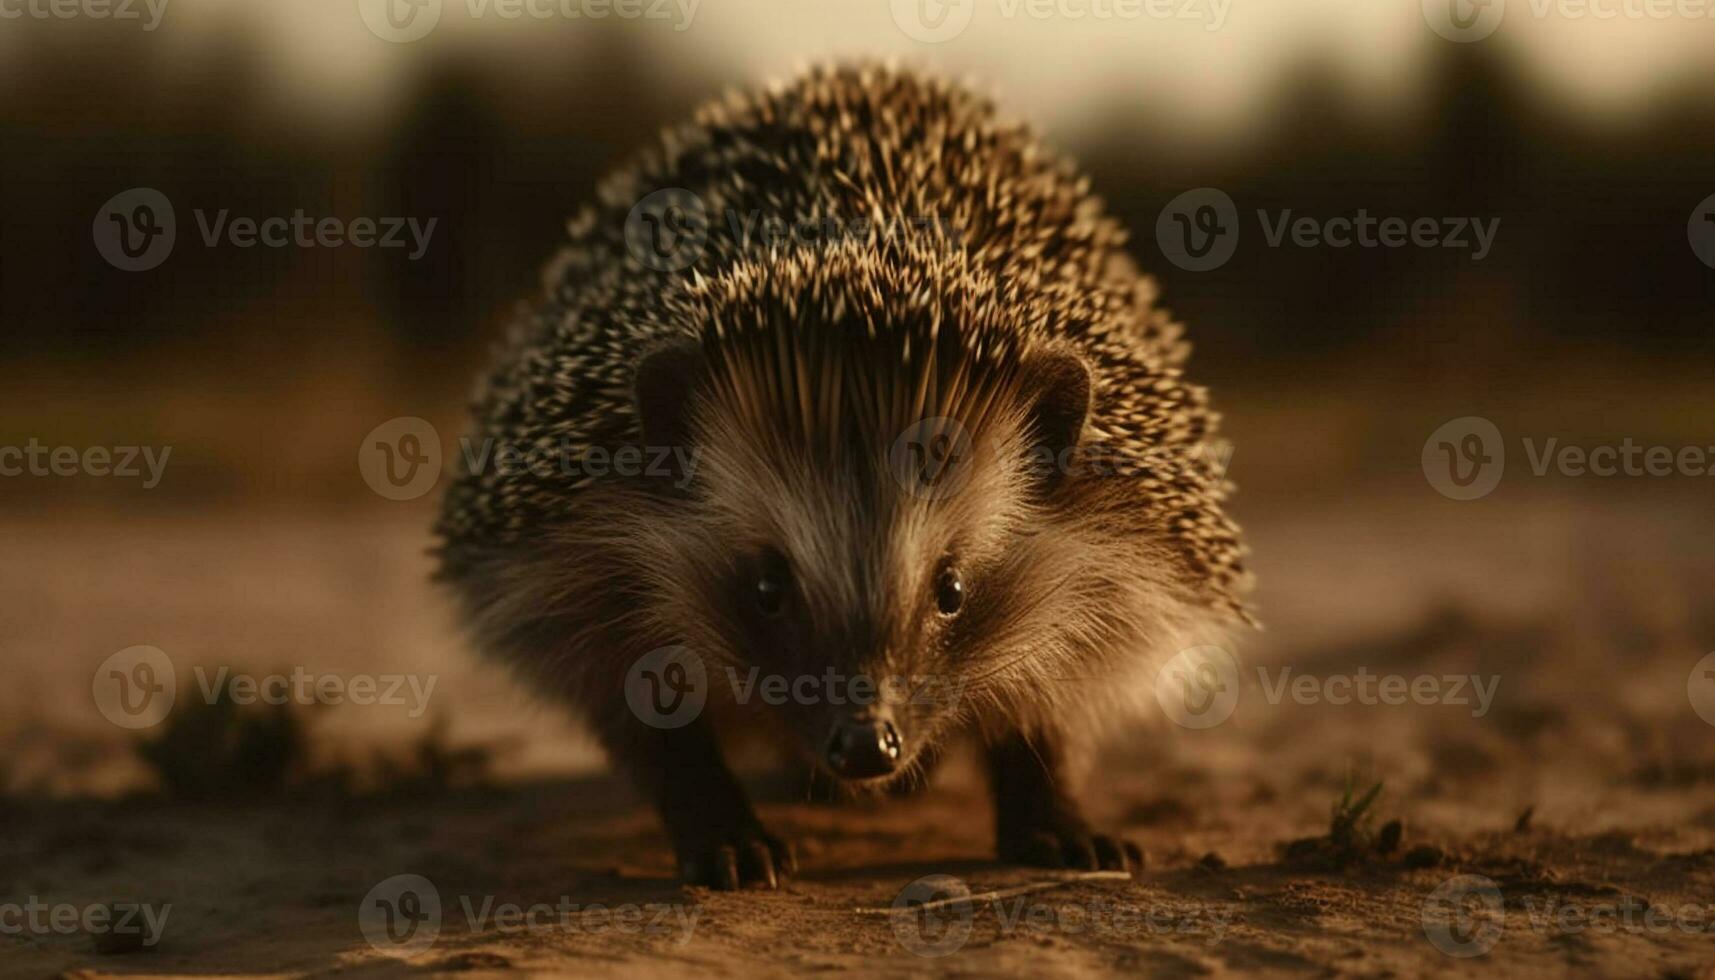 Cute hedgehog in the wild, small, close up, outdoors, nature beauty generated by AI photo